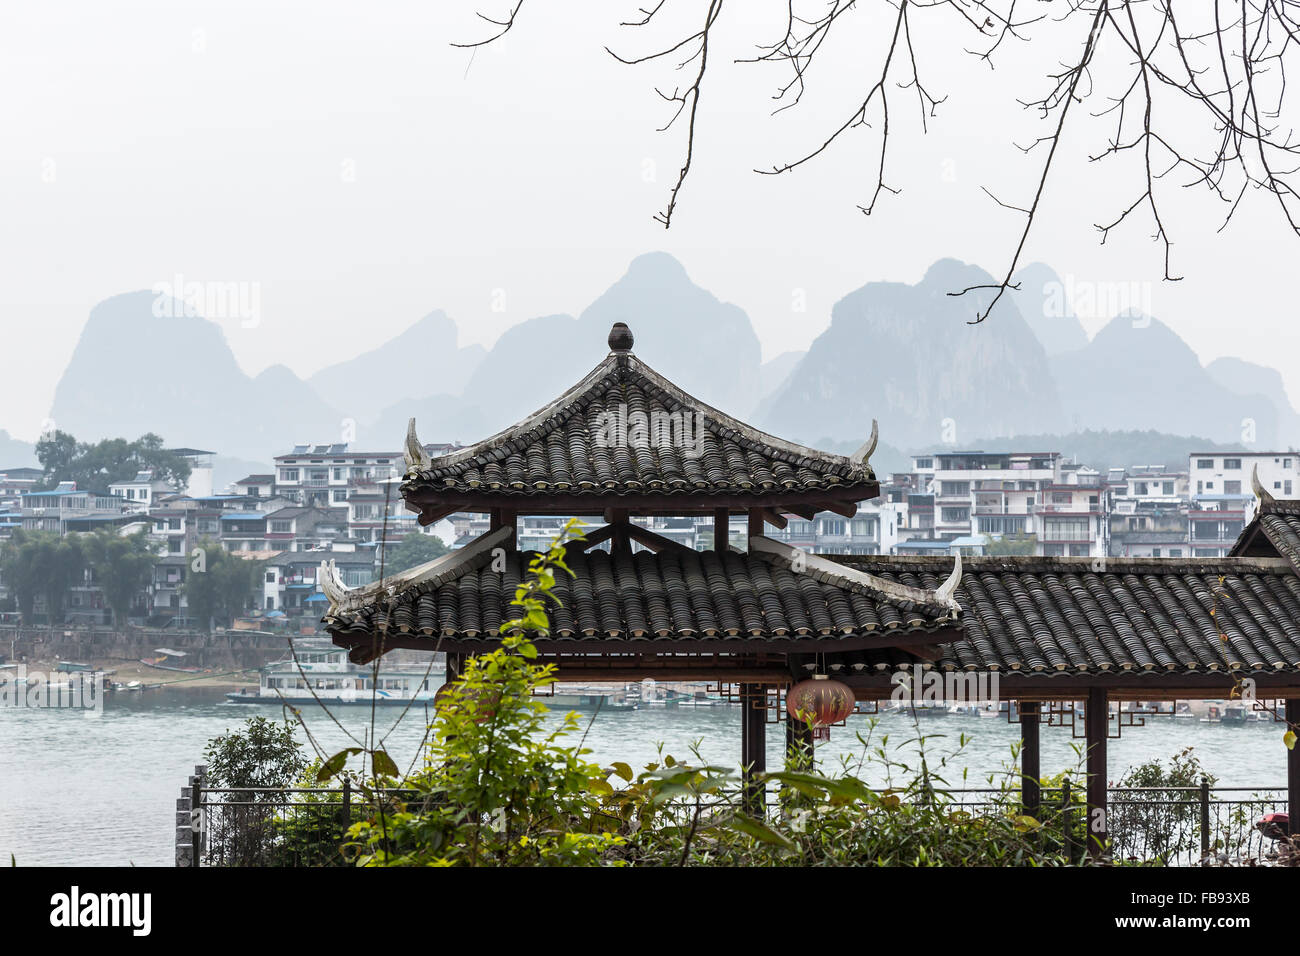 View of Li River, mountains and the architecture around it Stock Photo